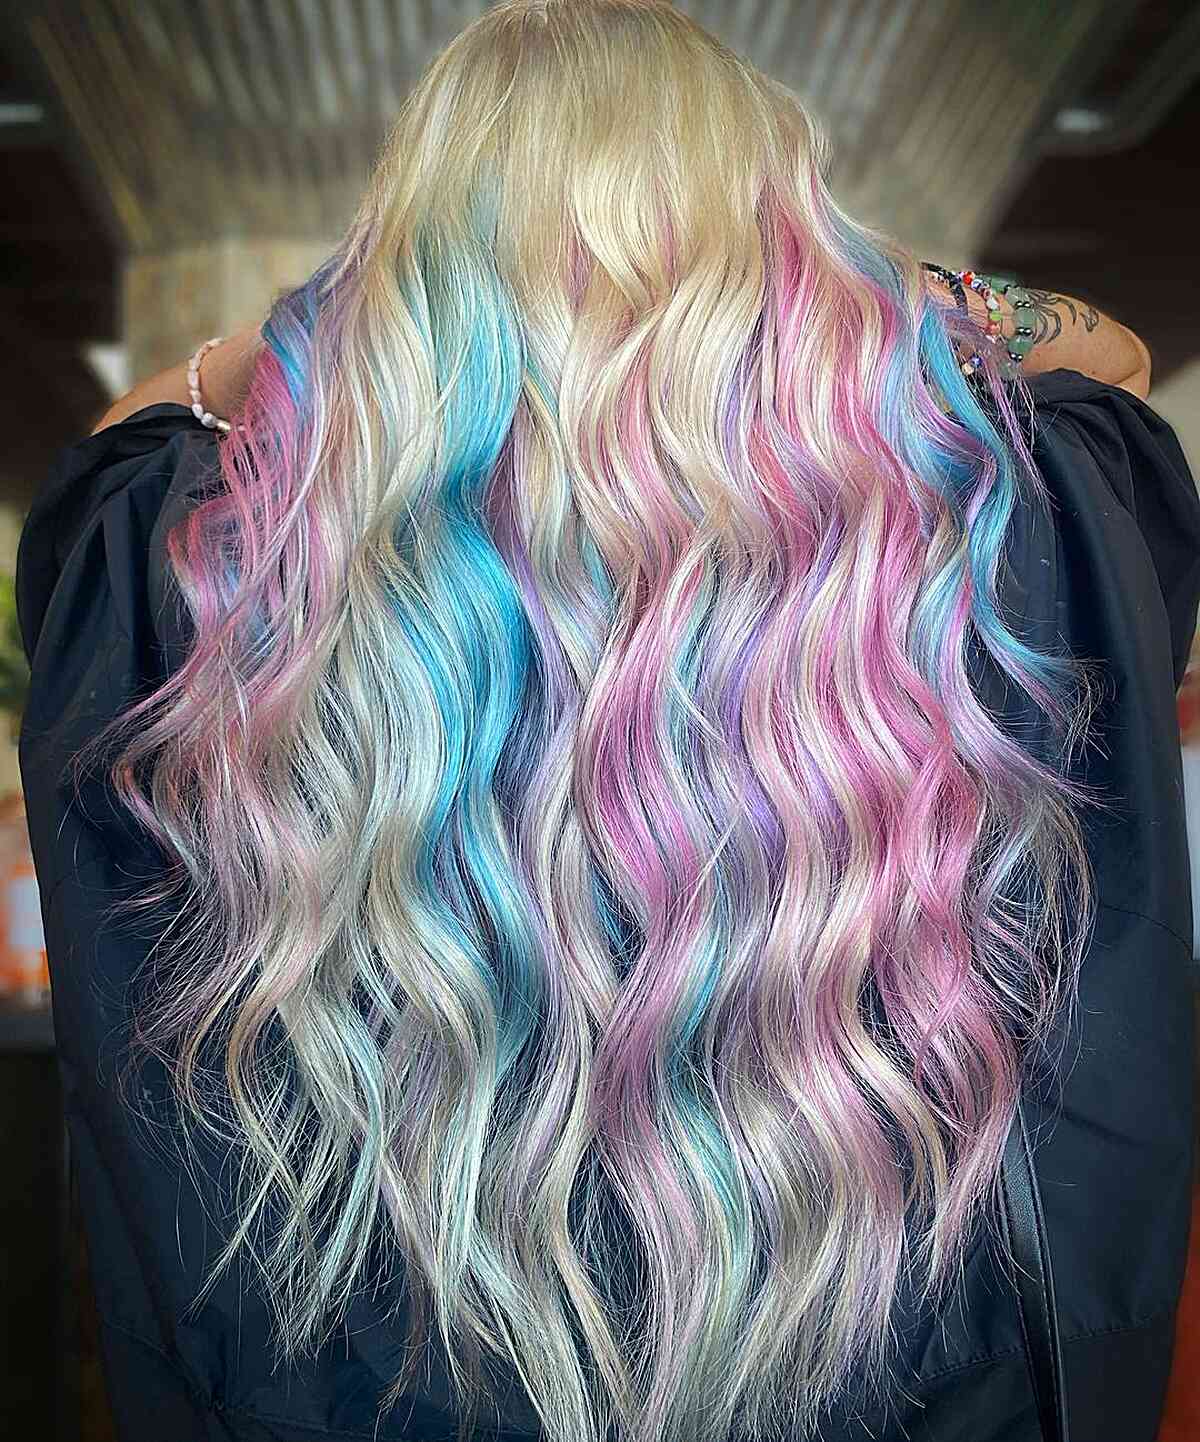 Long Blonde Mermaid Hair with Cotton Candy Pastel Accents